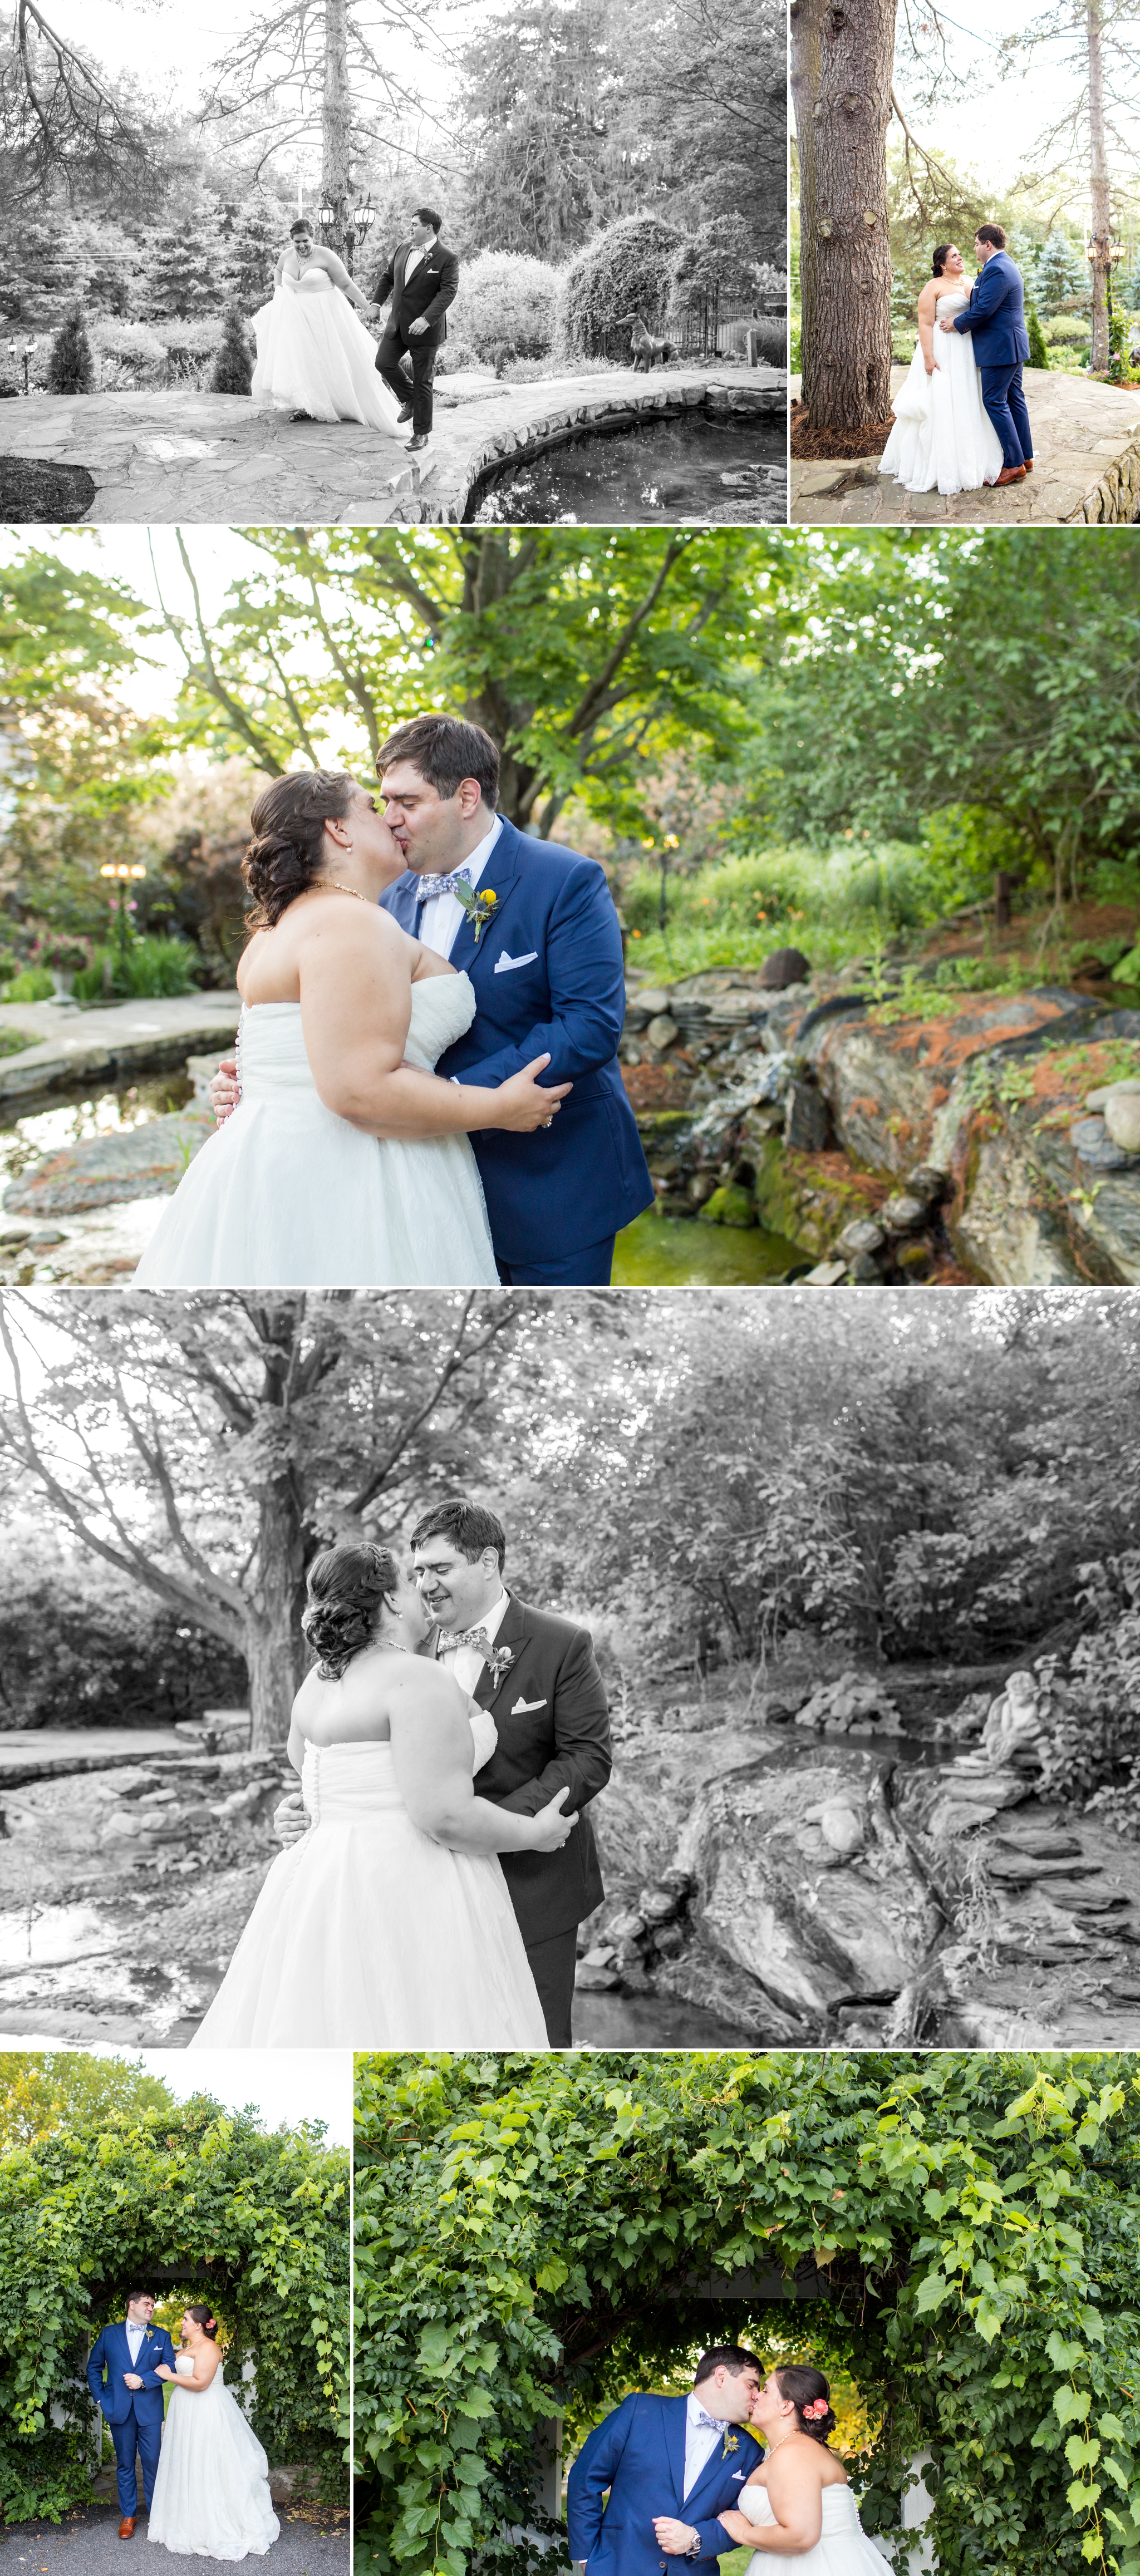 Hudson Valley, NY Wedding at Feast Caterers at Round Hill | Christina + George | Shaina Lee Photography | CT, NYC + Destination Wedding + Engagement Photographer